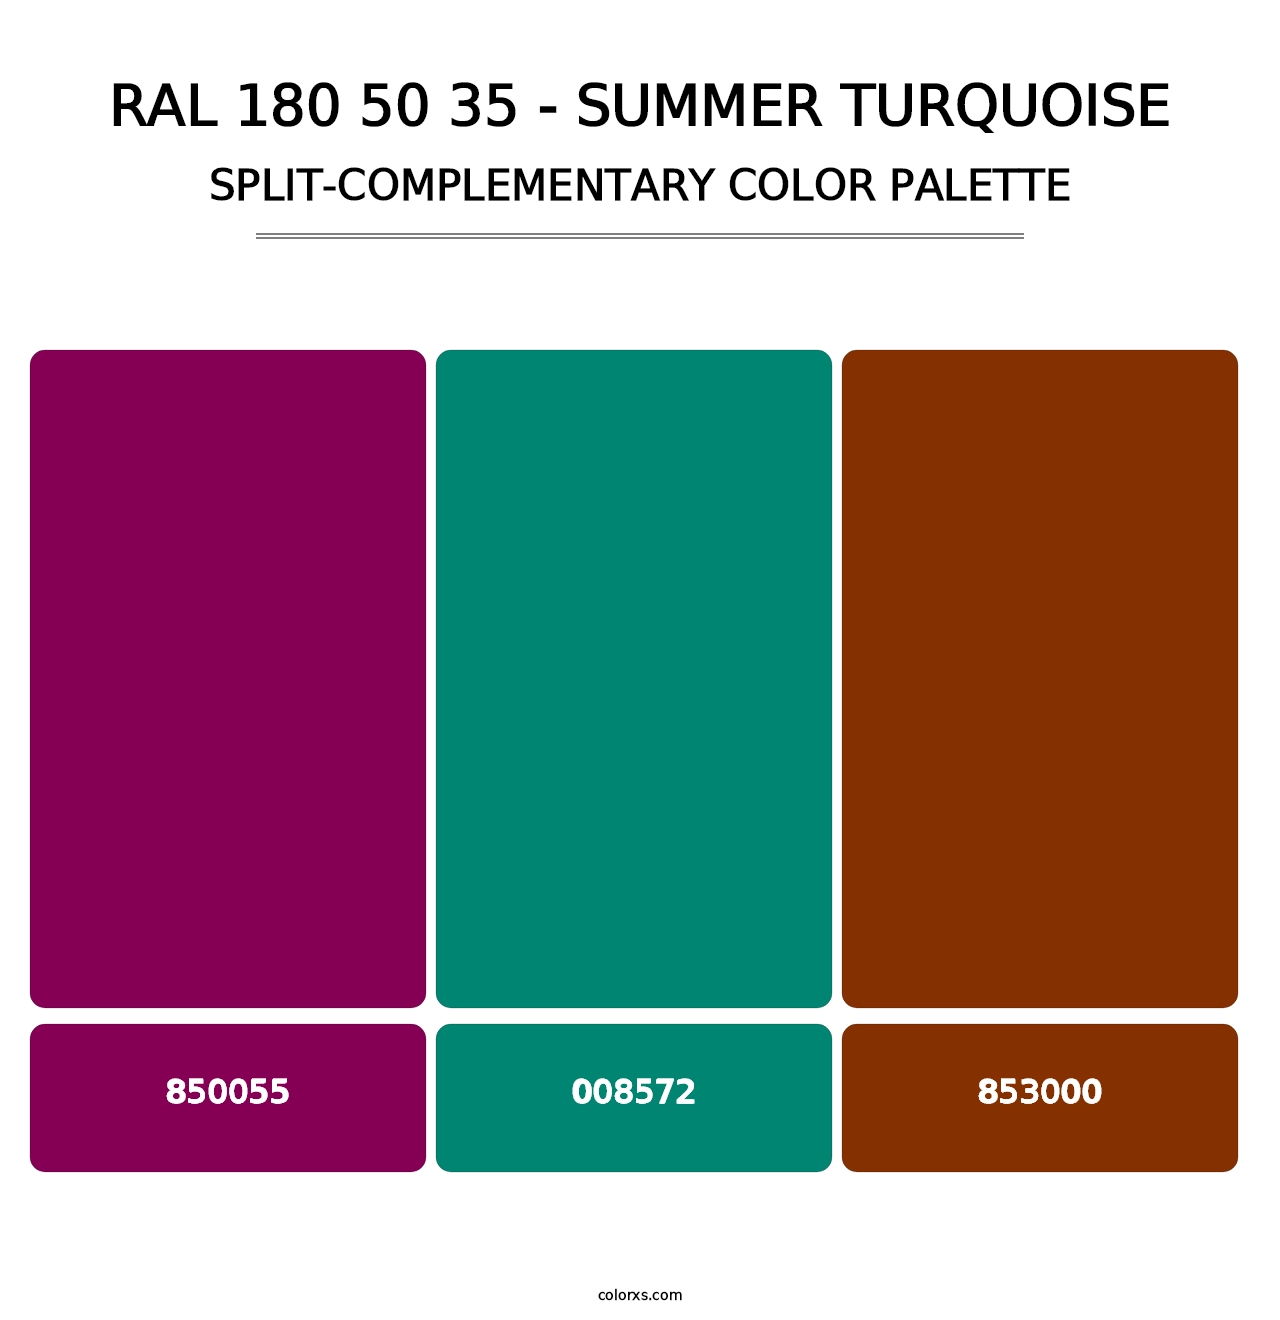 RAL 180 50 35 - Summer Turquoise - Split-Complementary Color Palette